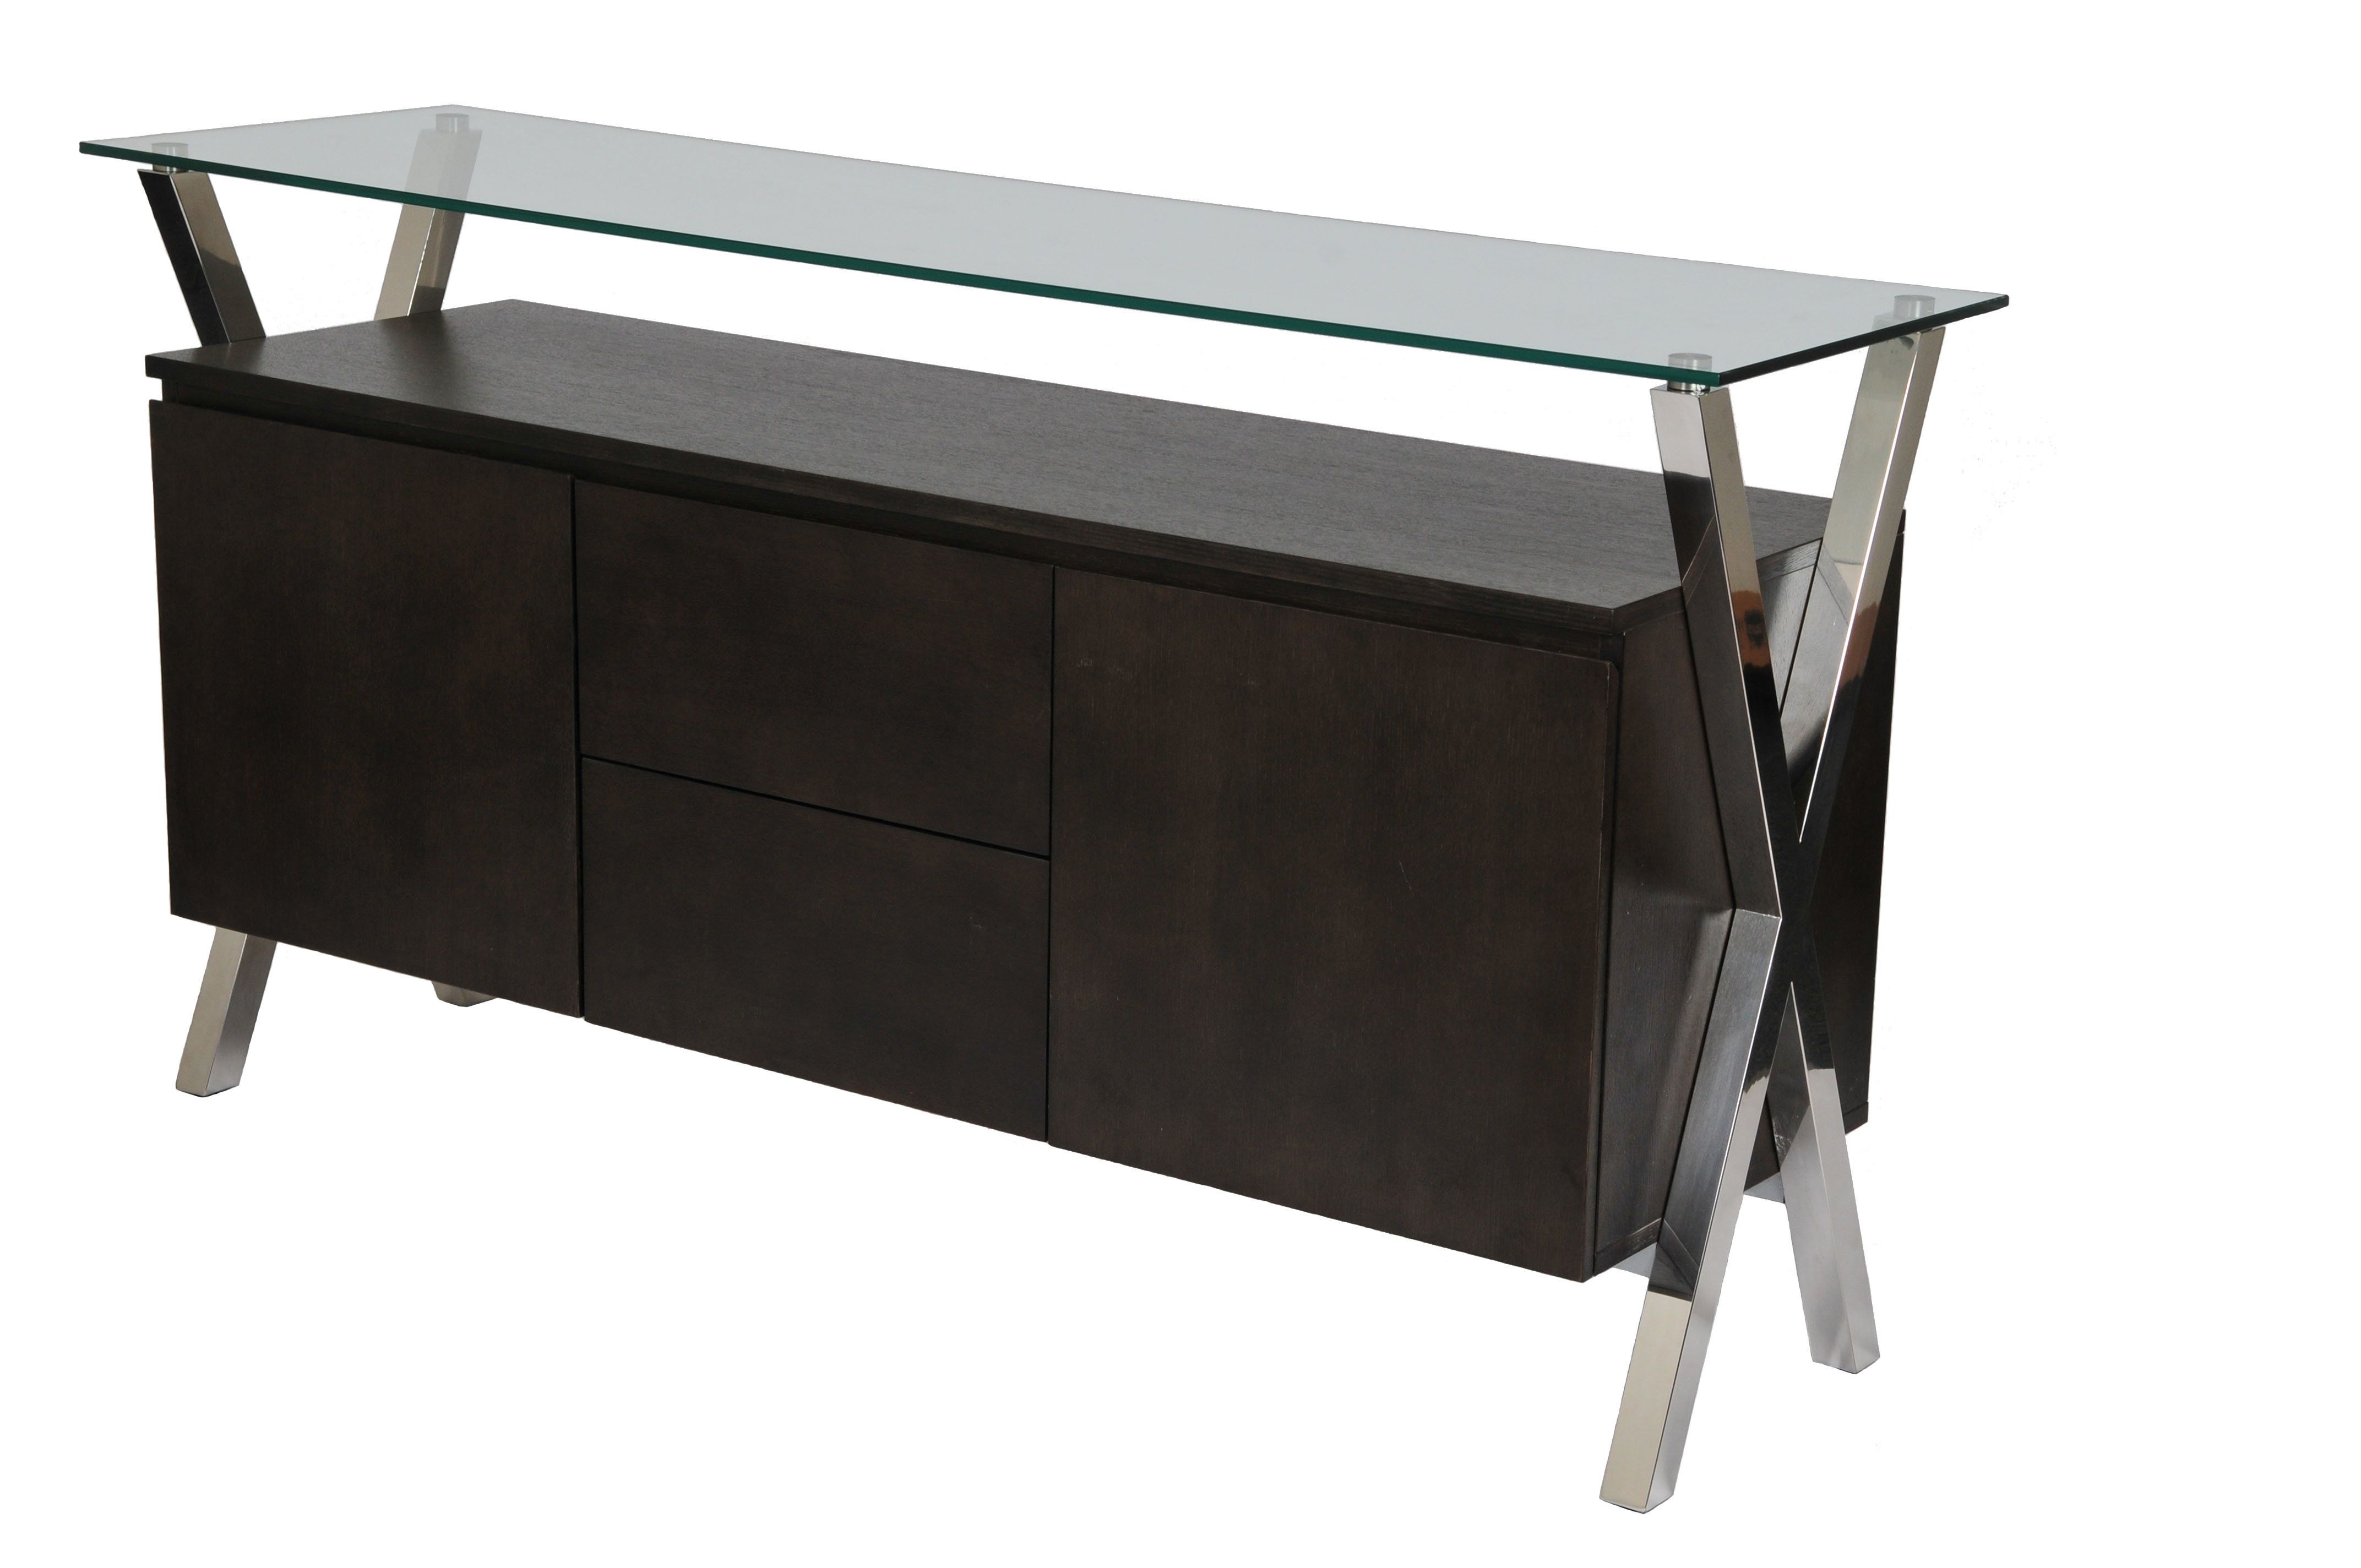 Modern & Contemporary White Lacquer Sideboard | Allmodern With Regard To 4 Door Lacquer Buffets (View 27 of 30)